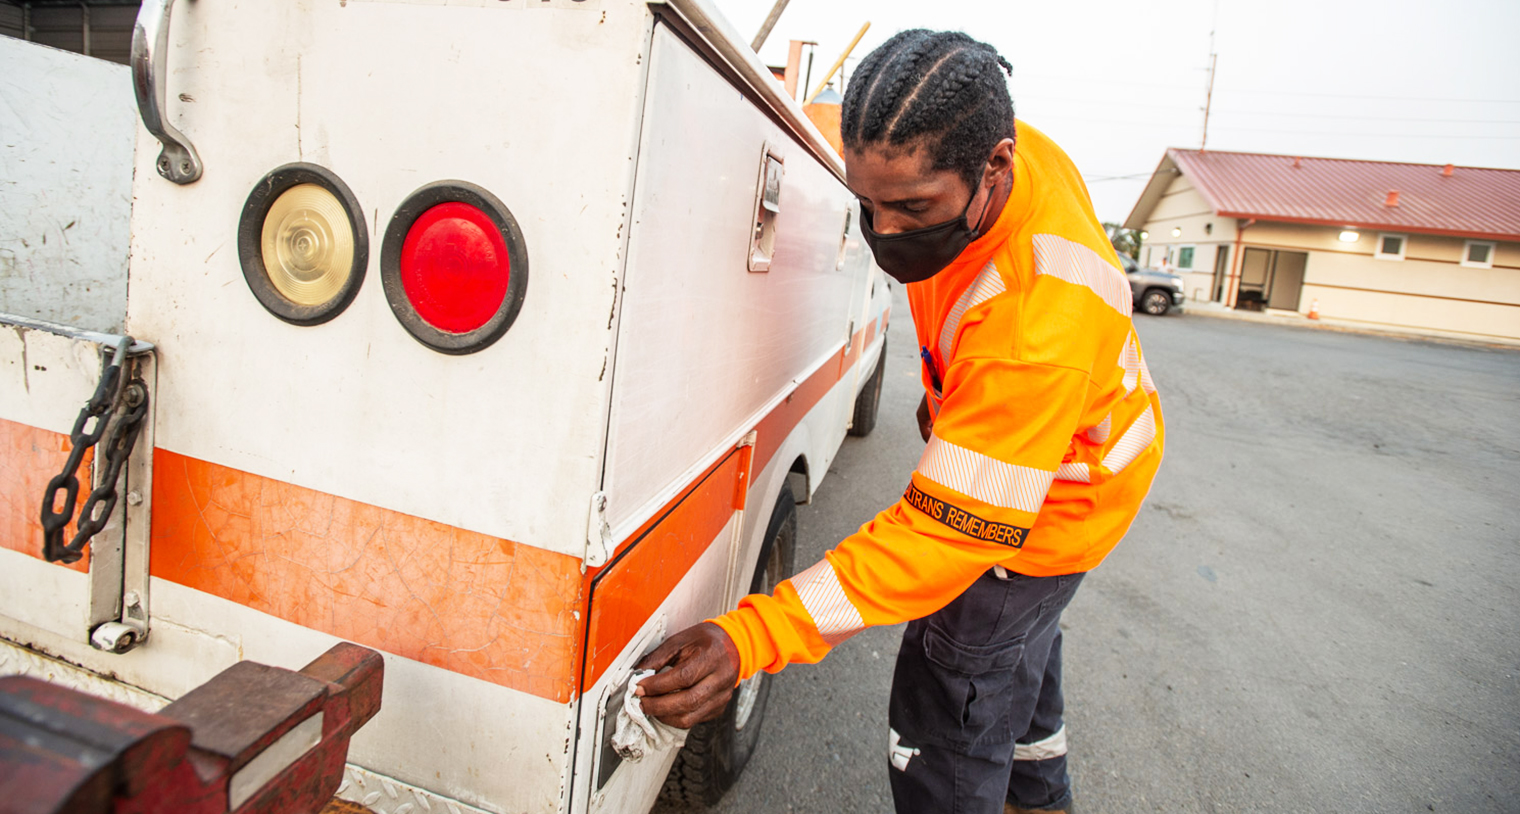 Photo of Caltrans maintenance worker, Shaun Mason cleaning the handles on a Caltrans vehicle with a disinfectant wipe.